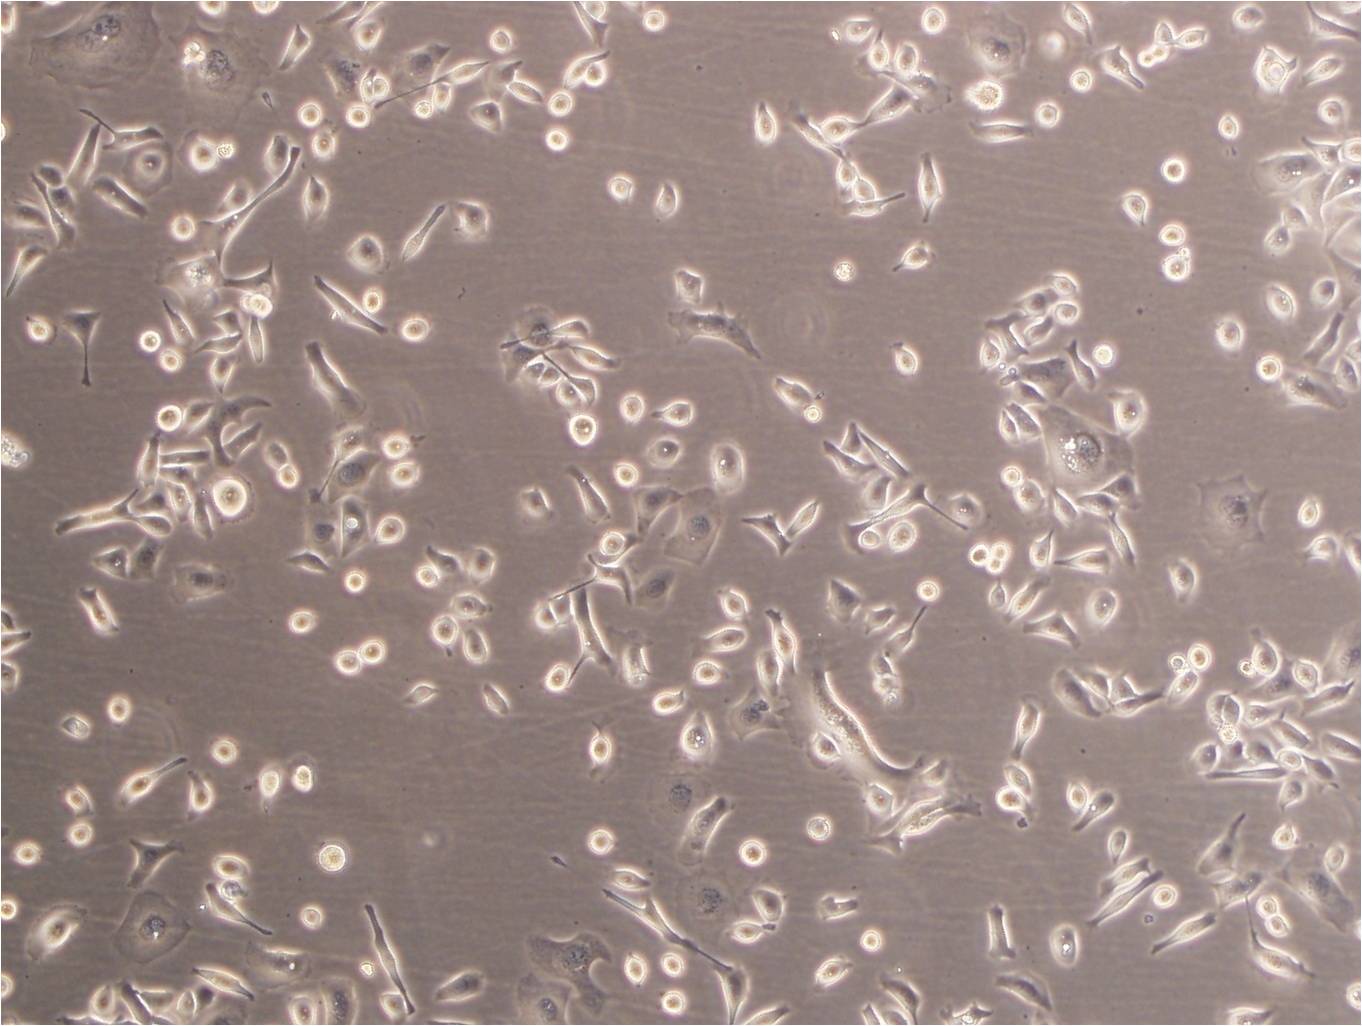 HCC827 Epithelial Cell|人非小细胞肺癌传代细胞(有STR鉴定),HCC827 Epithelial Cell